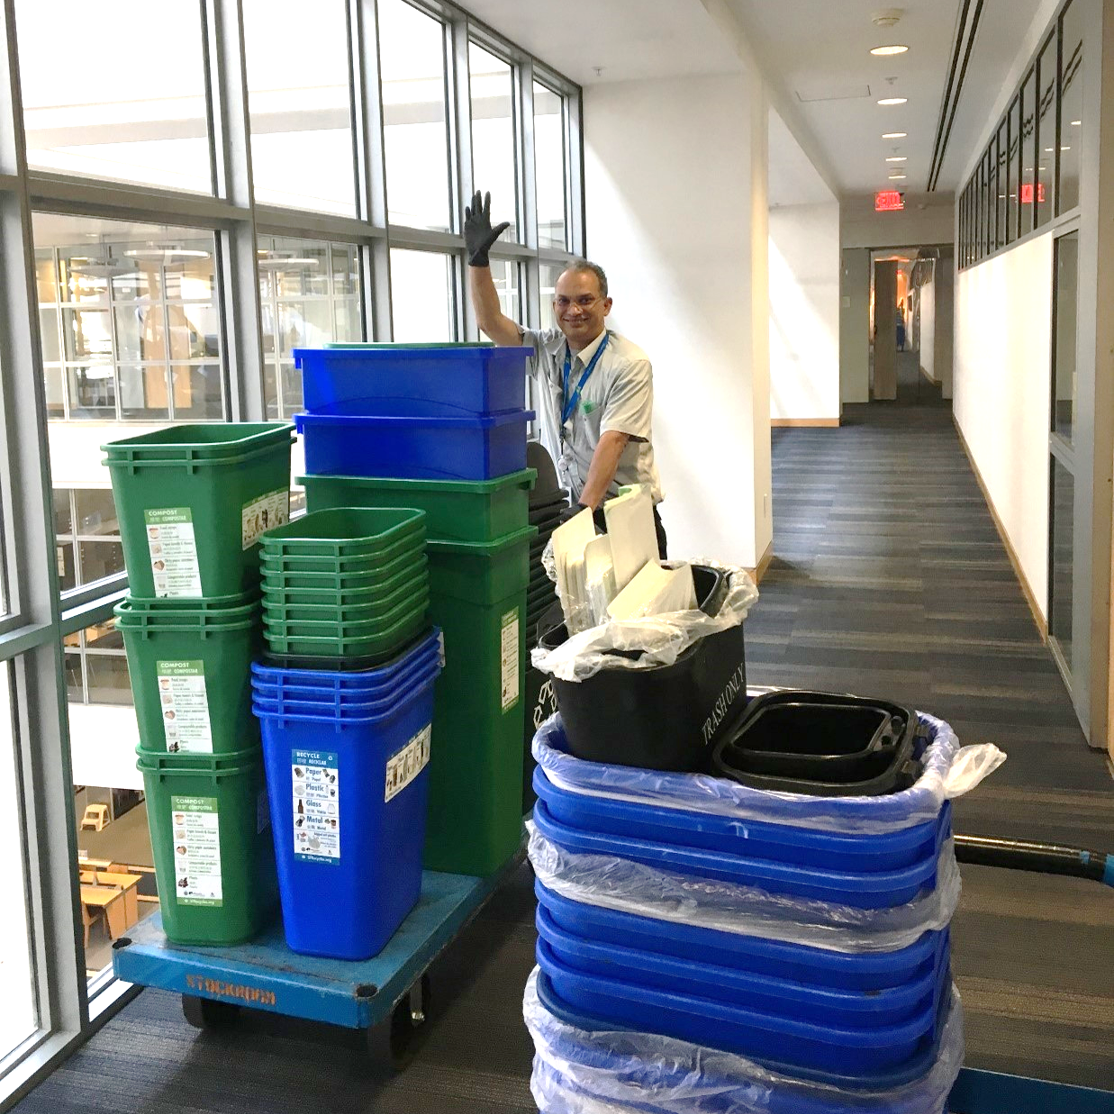 Zero Waste coordinator in a commercial building distributing green and blue bins